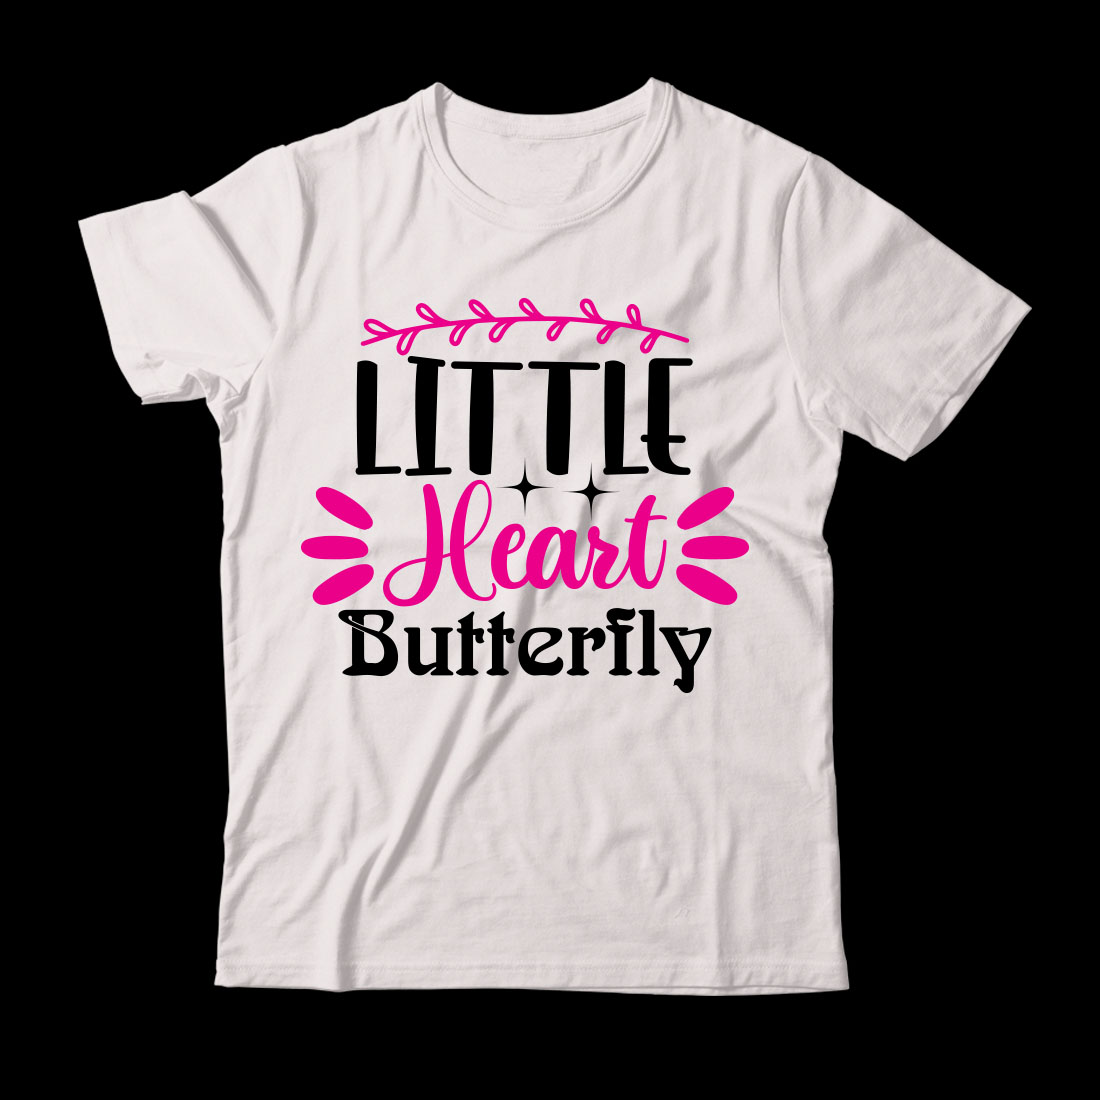 White t - shirt that says little heart butterfly.